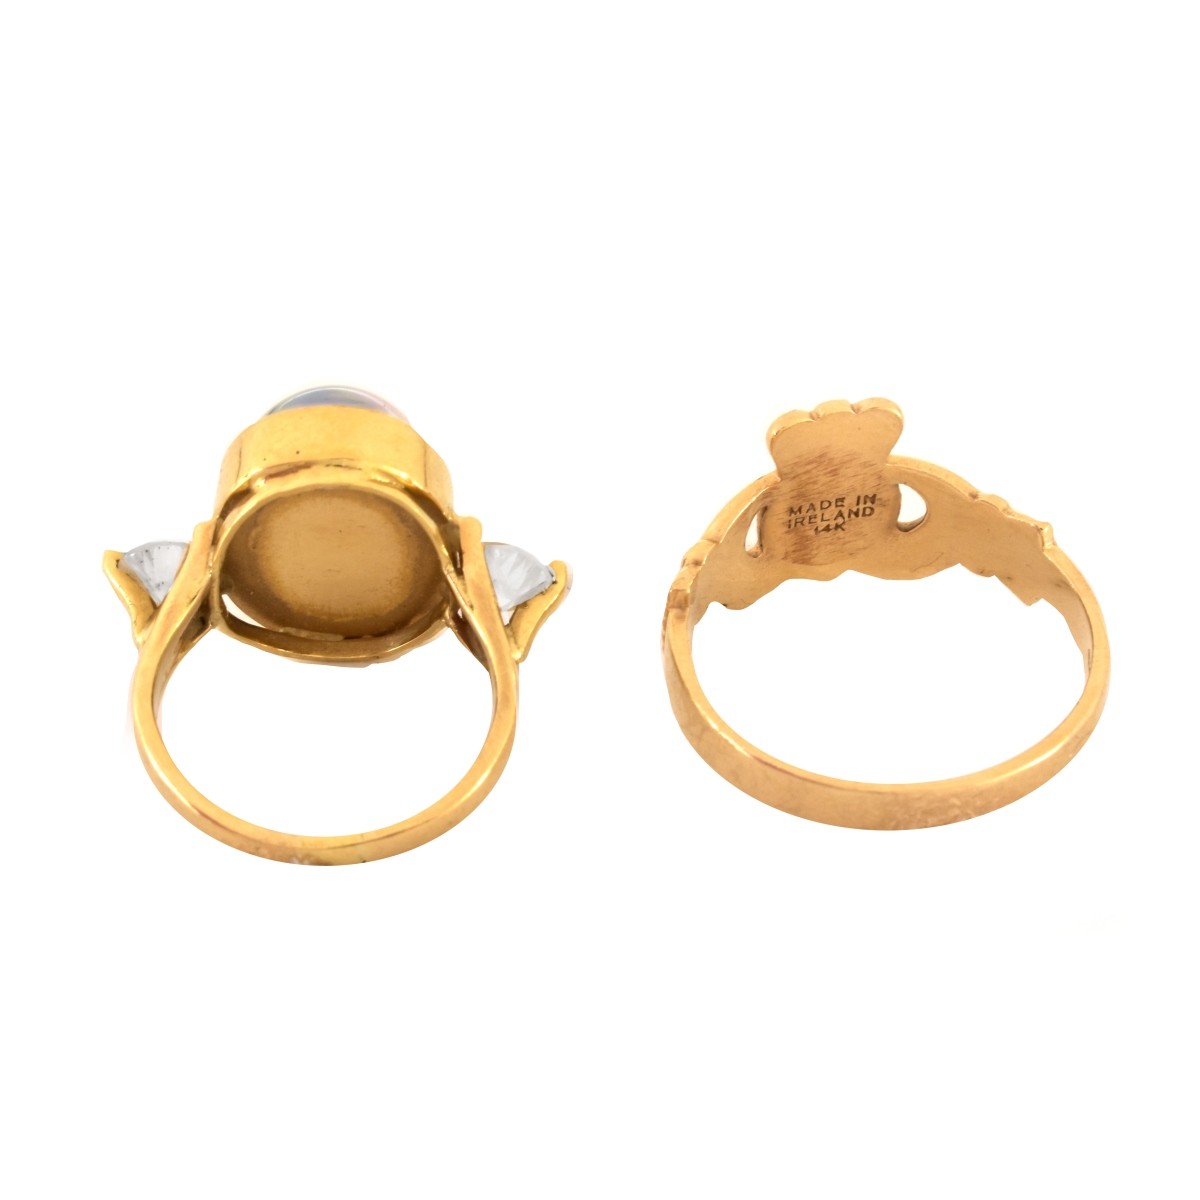 Two (2) Vintage Gold Rings